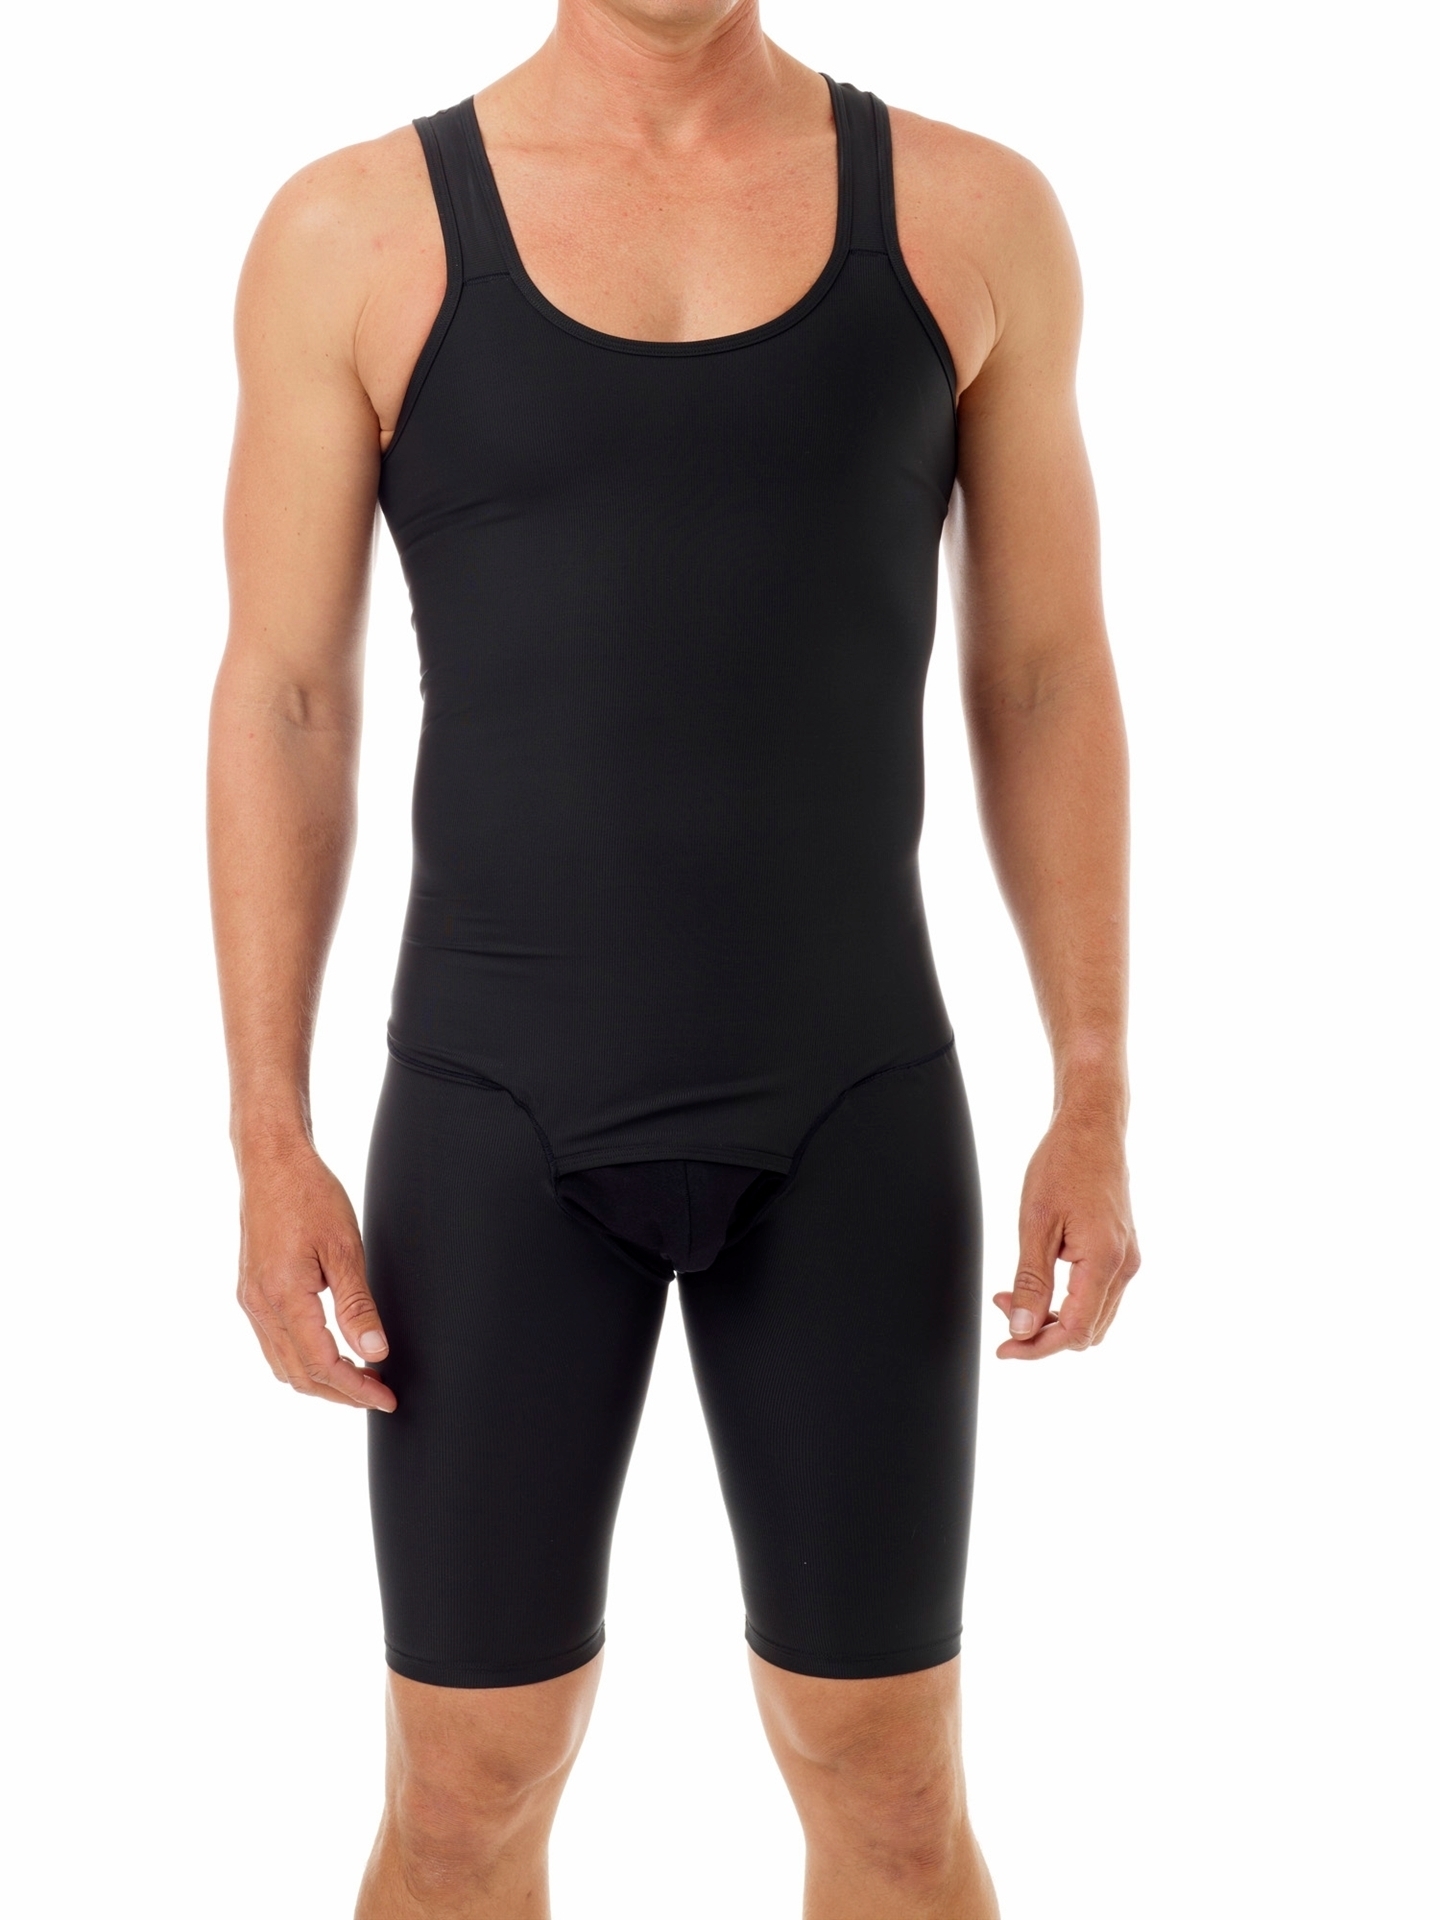 Men's Compression Bodysuit with Rear Zipper | Discover at Underworks ...